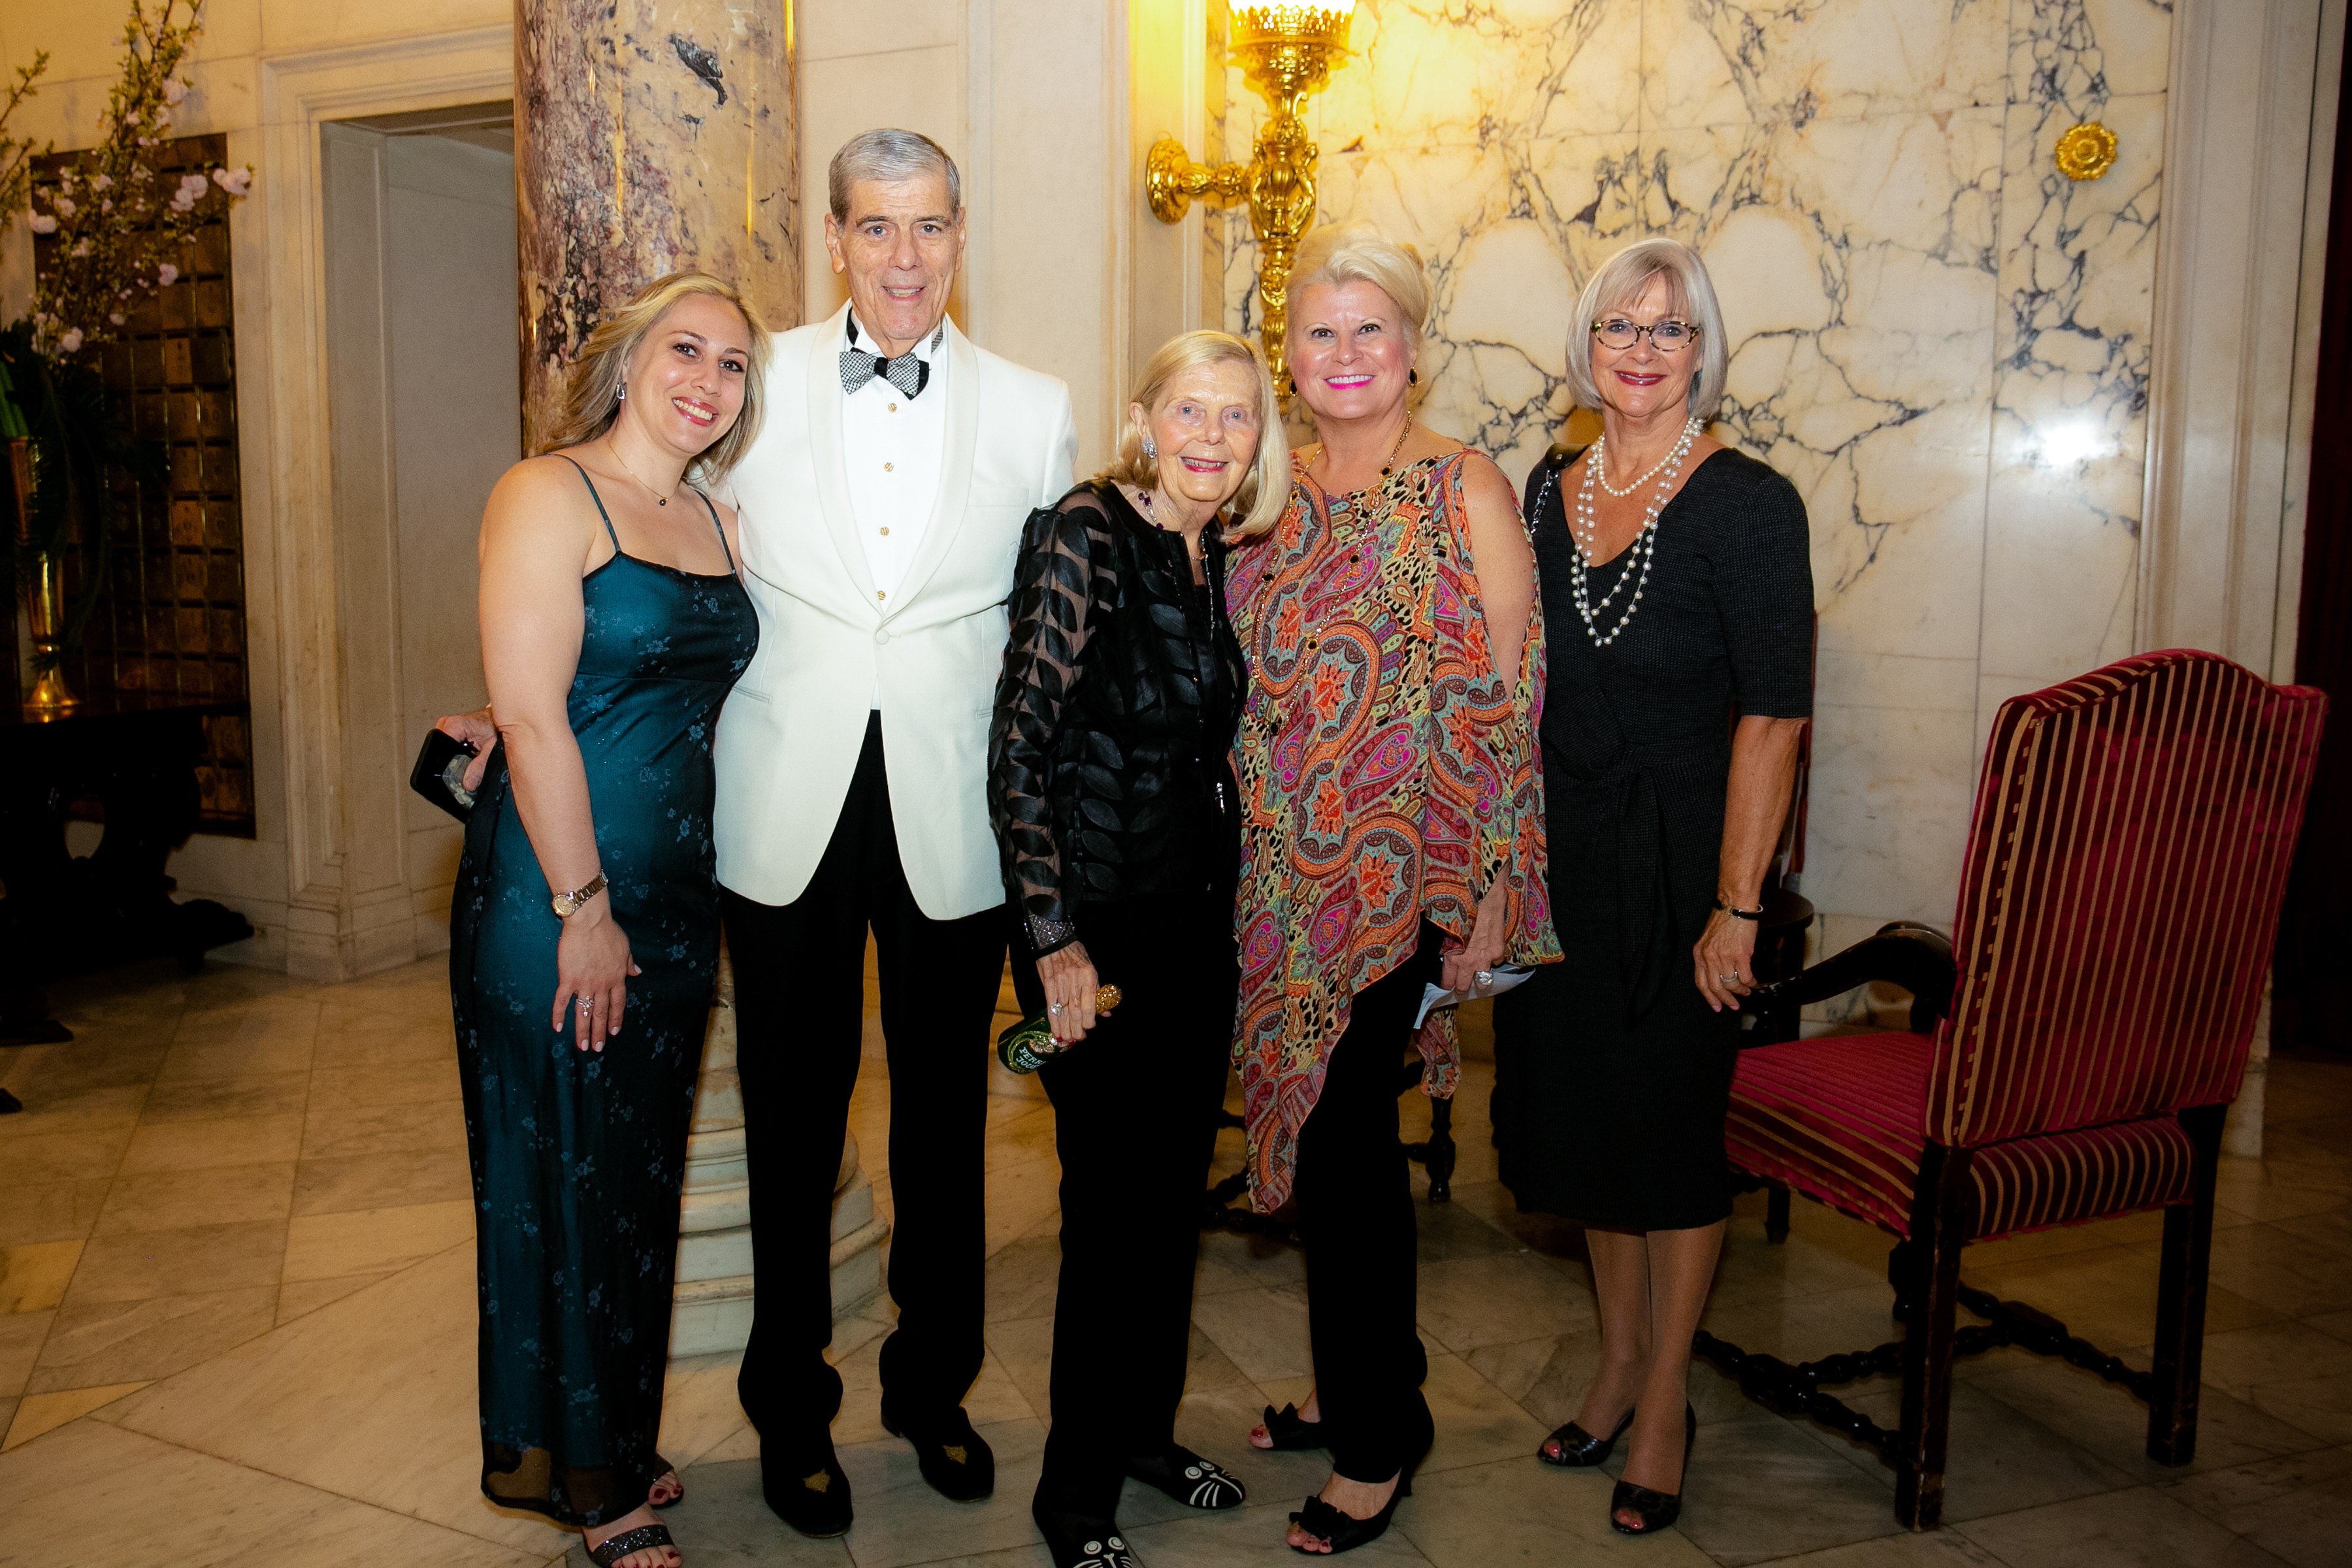 Five people pose together and face the camera at the 2019 Gala Event